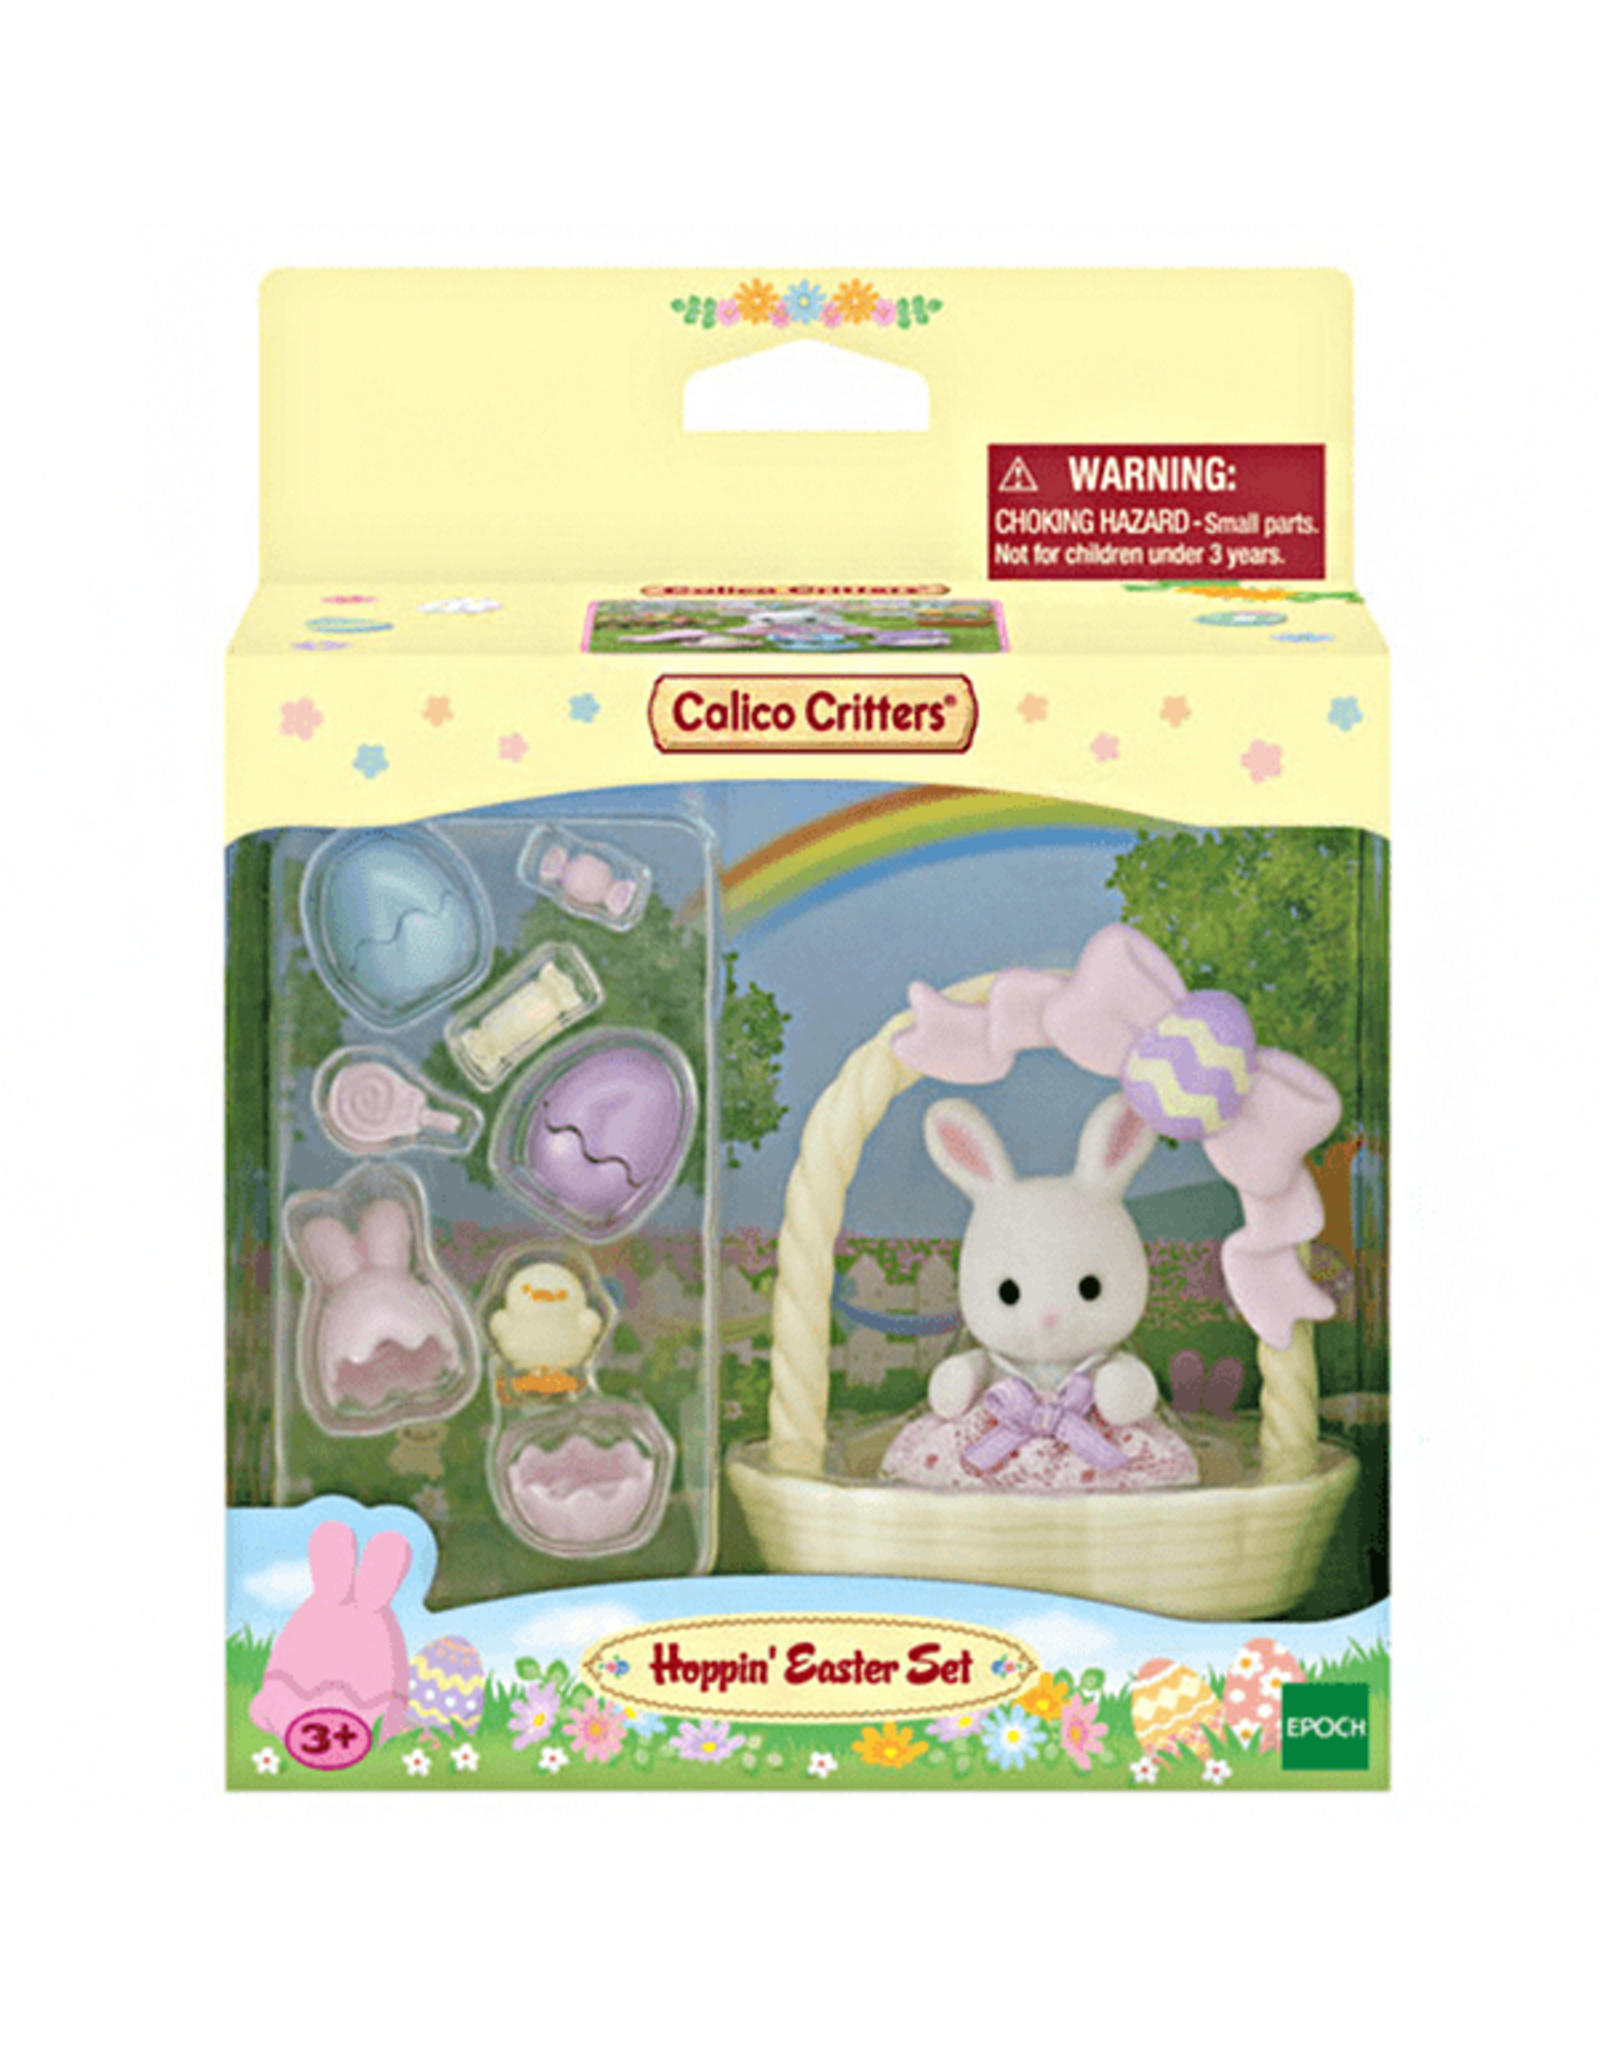 Calico Critters Calico Critters Hoppin' Easter Set